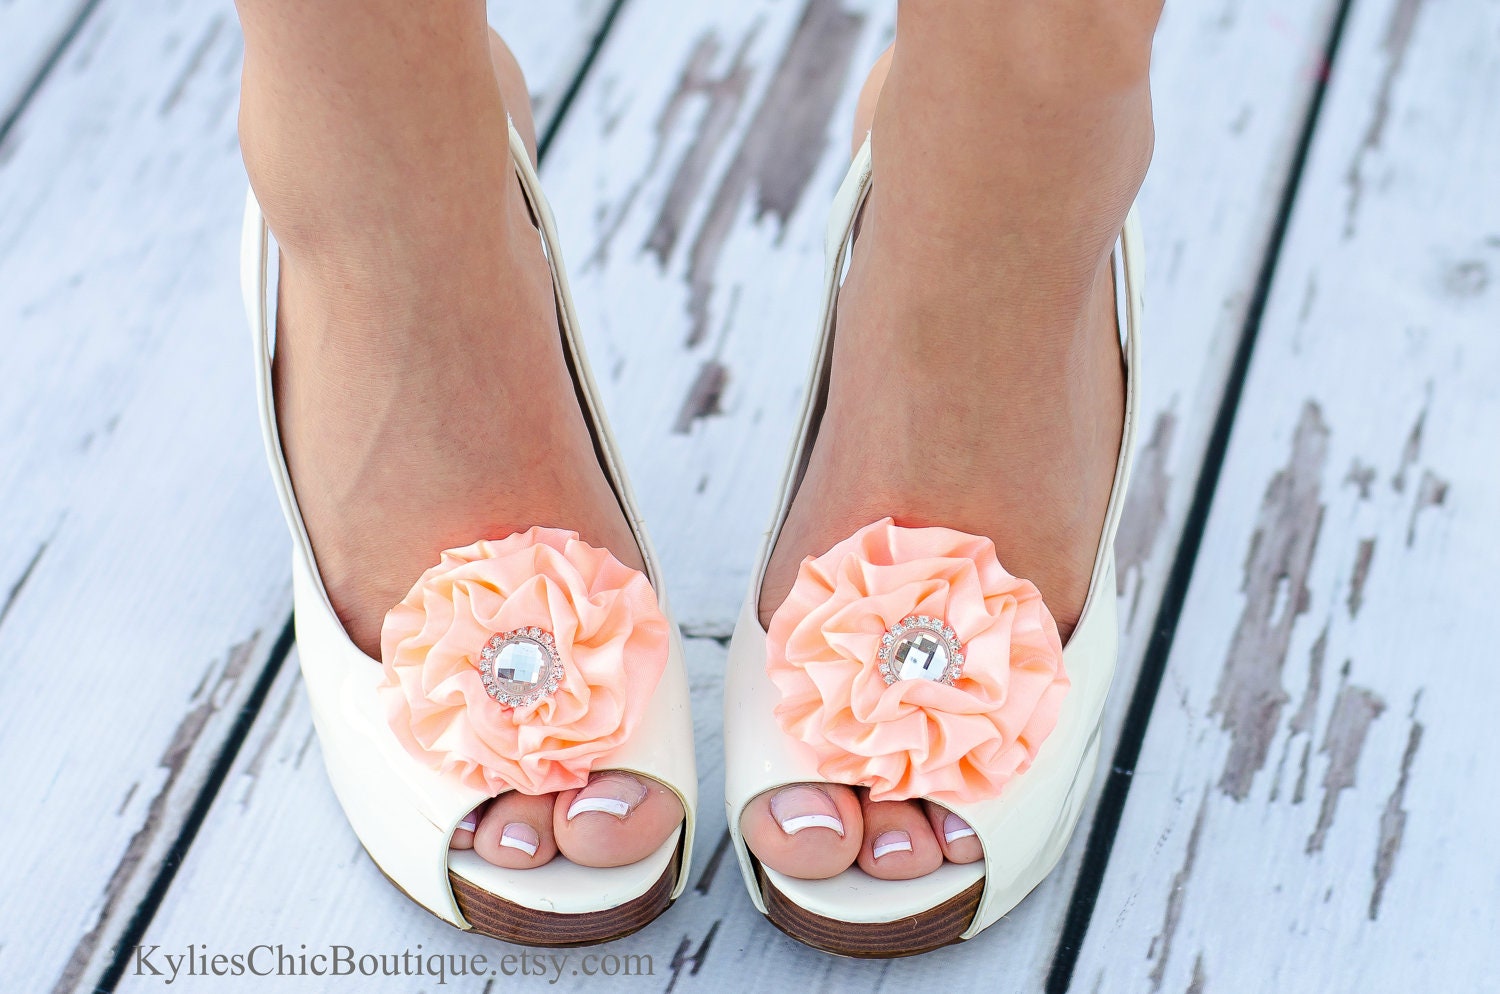 Peach Shoe Clips - Wedding, Bridesmaid, Date Night, Party, Everyday wear